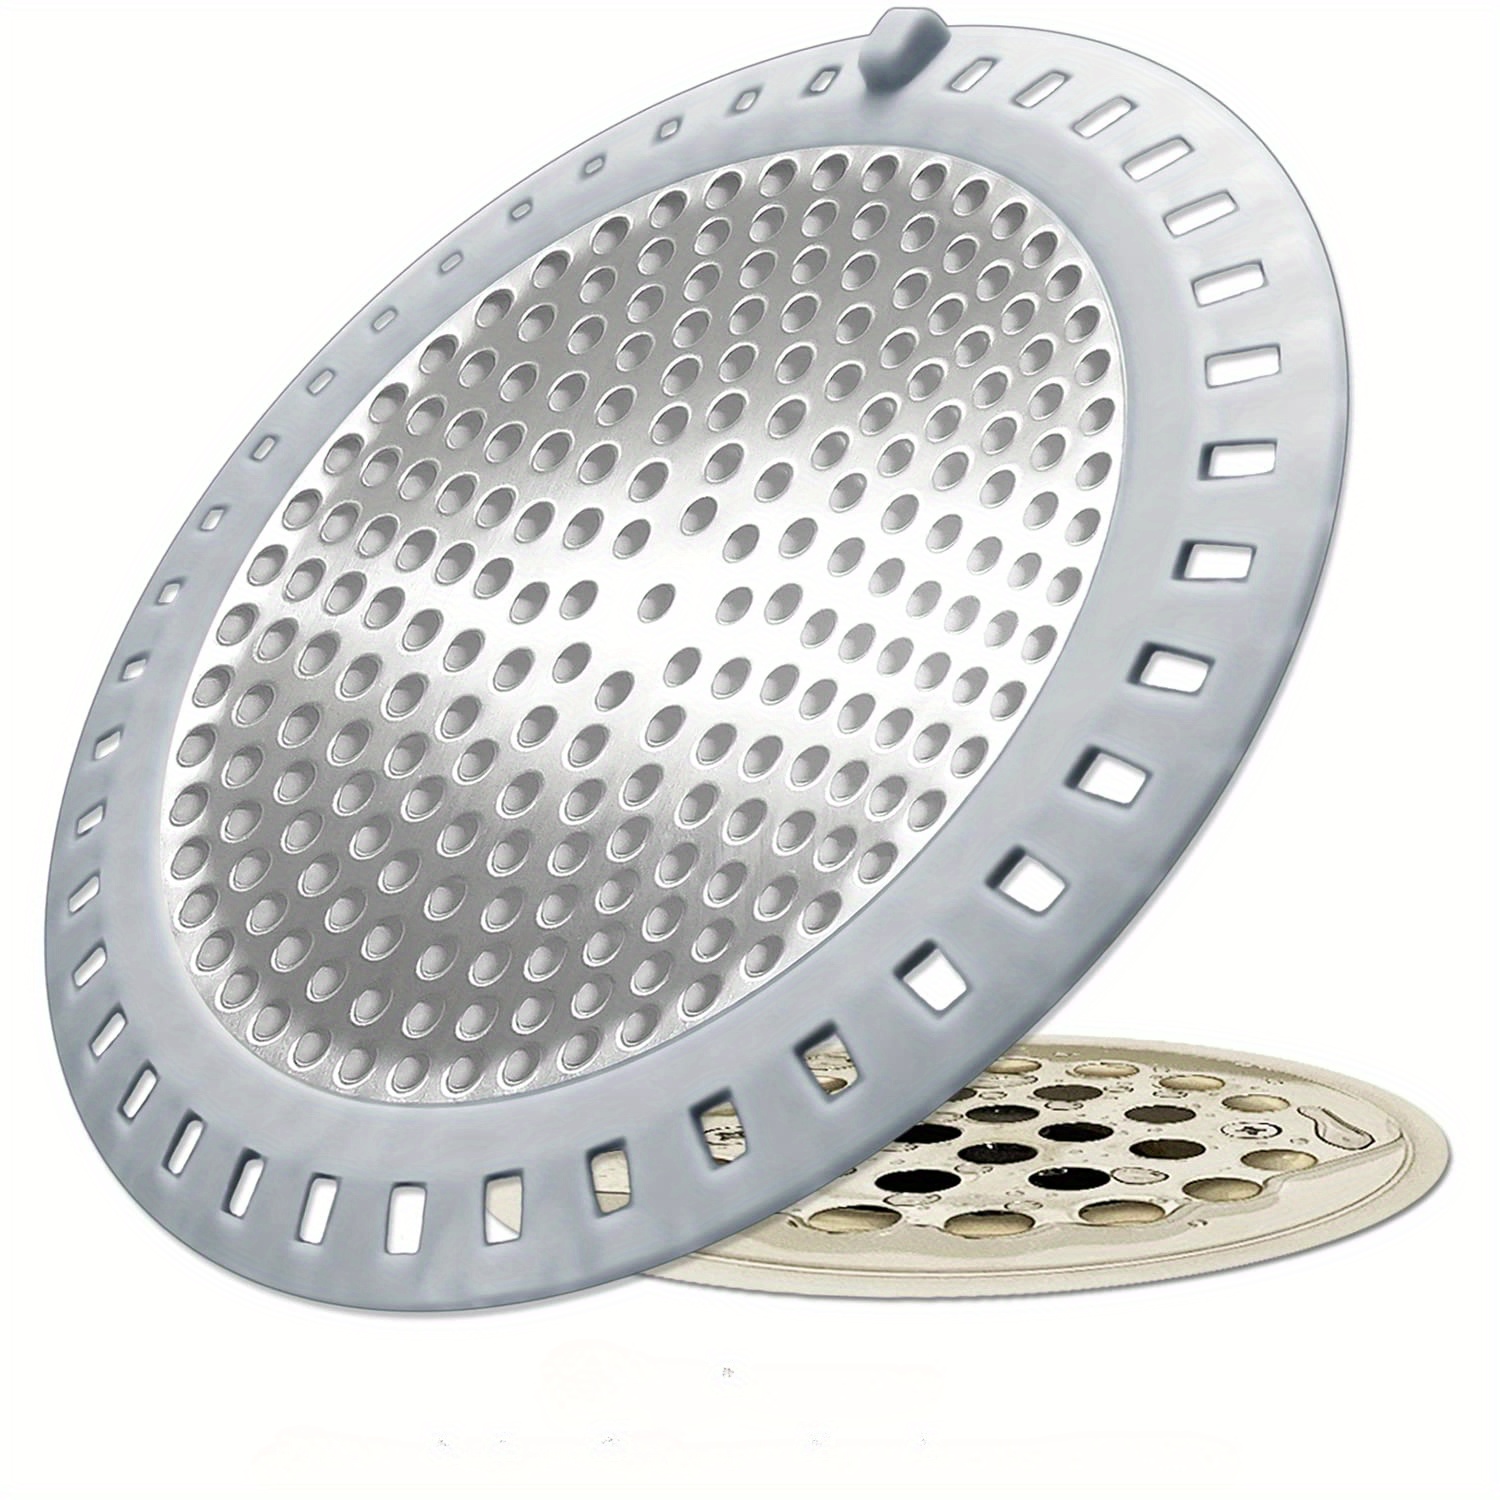 

1pc Stainless Steel Shower Drain Hair Catcher, Silicone Edged Strainer, Anti-clog Cover Filter Trap For Bathroom, Bathtub, Floor Drain